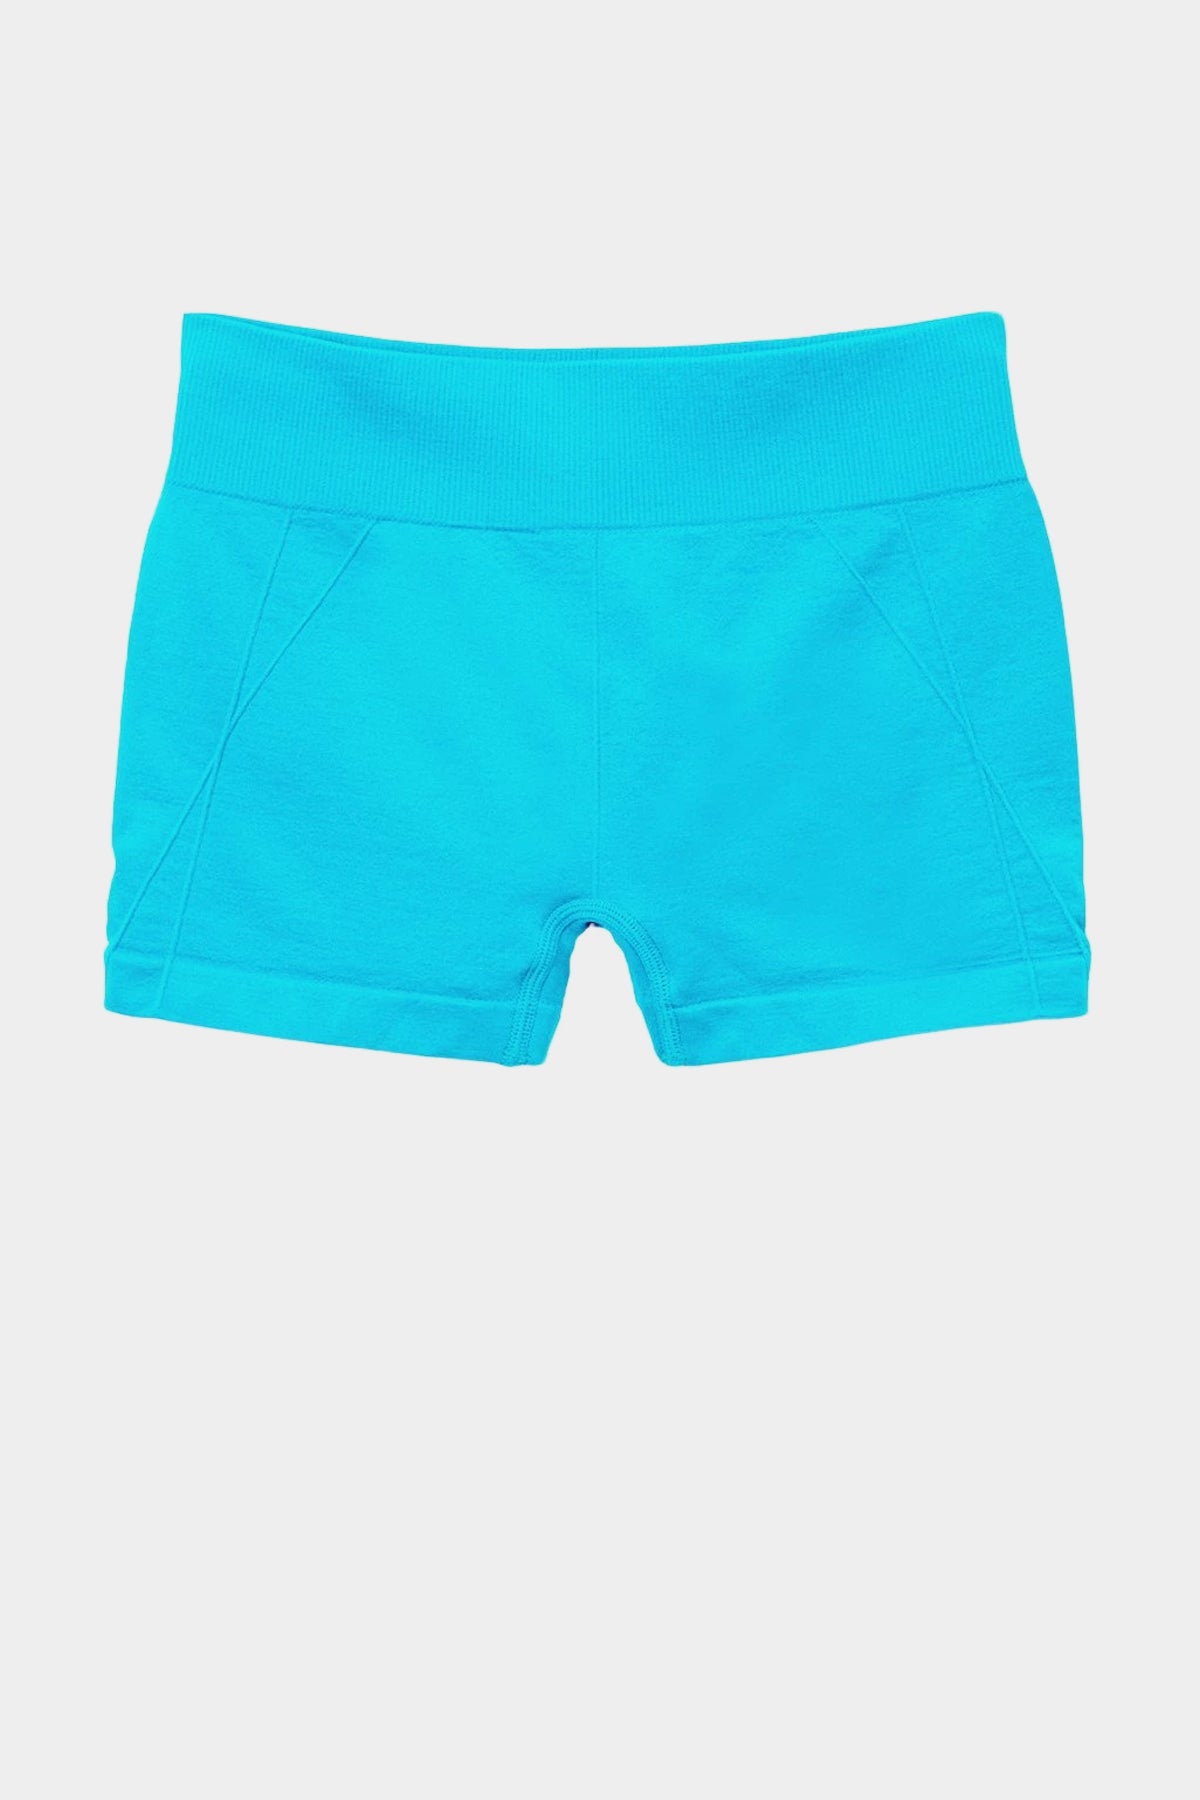 Active Gear Mini Shorts - Turquoise